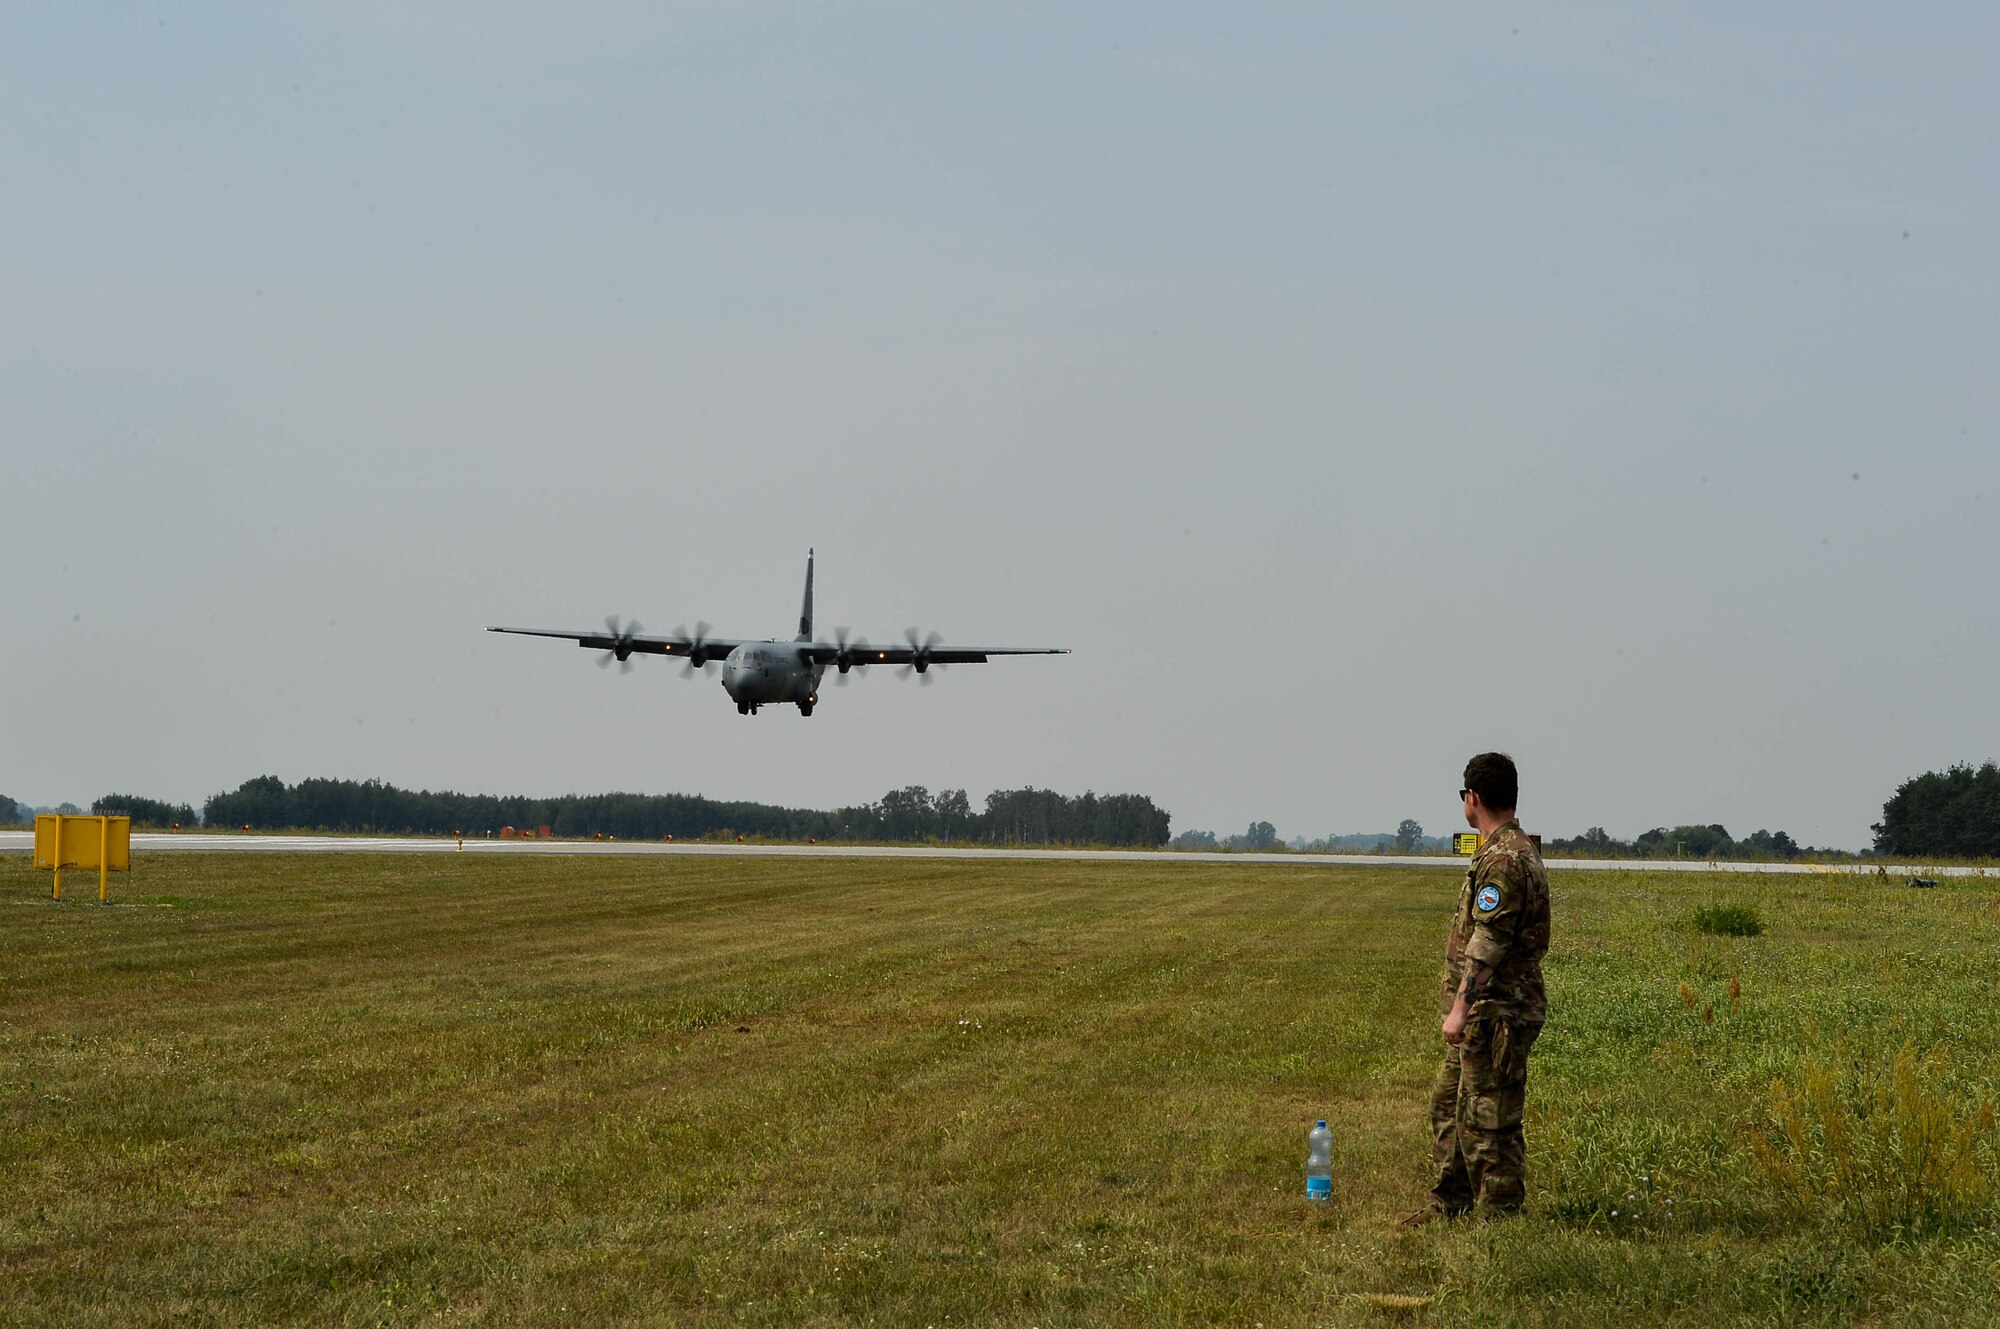 U.S. Air Force Tech. Sgt. Joshua Todd, 435th Contingency Response Group weather specialist, watches a Polish Air Force C-130E land on Powidz Air Base, Poland, Aug. 9, 2018. U.S. Airmen from Ramstein Air Base, Germany, arrived in Poland to conduct bilateral exercises with the Polish Air Force. (U.S. Air Force photo by Senior Airman Joshua Magbanua)